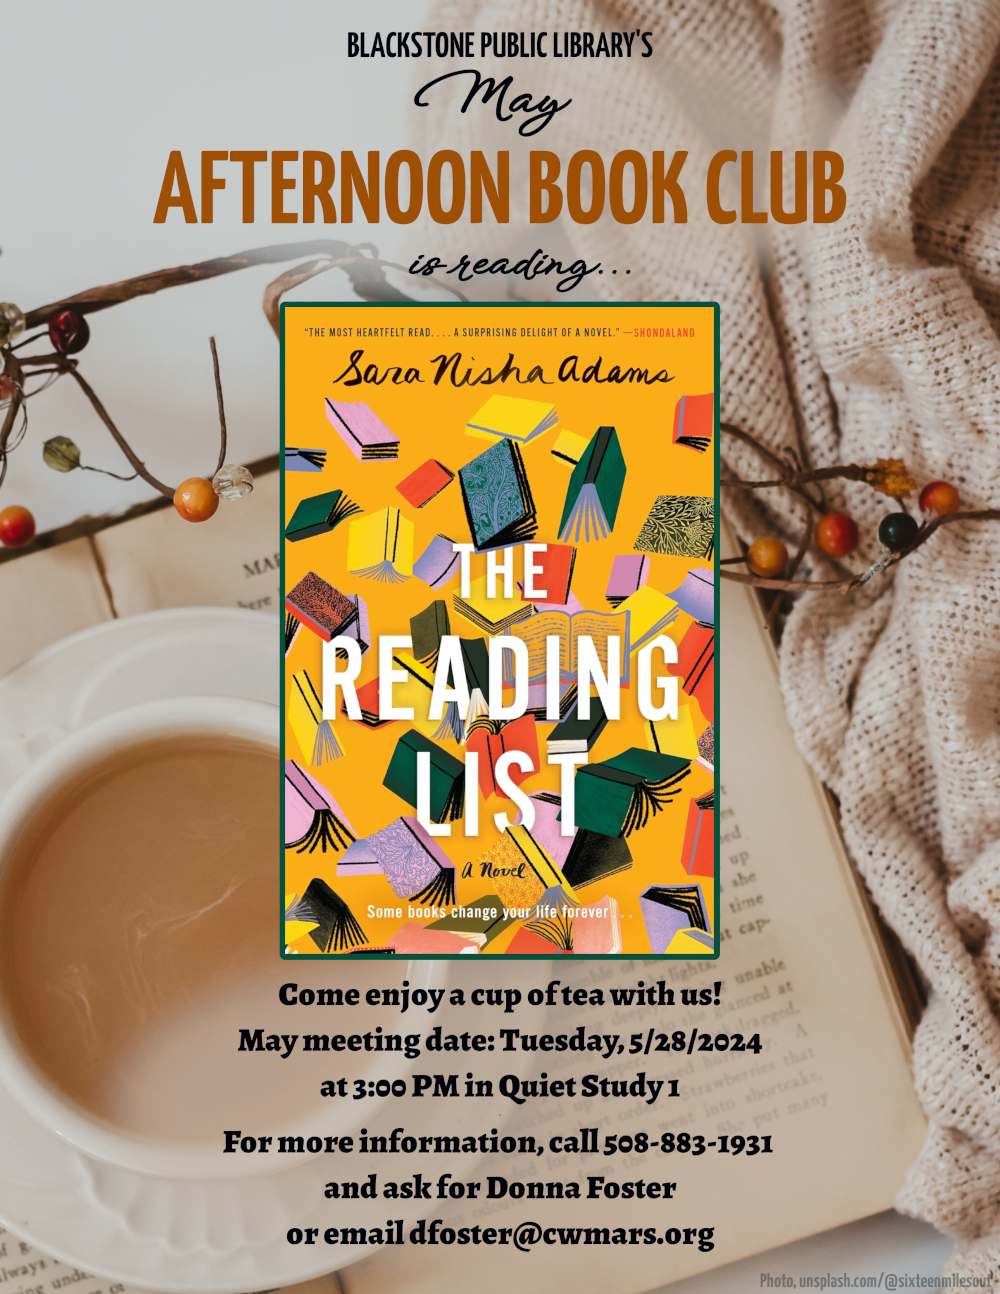 Blackstone Public Library’s May Afternoon Book Club is reading "The Reading List" a novel by Sara Nisha Adams.  Come enjoy a cup of tea with us! May meeting date: Tuesday, 5/28/2024 at 3:00 PM in Quiet Study 1.  Image description: The title of the book is in bold white sans-serif font, with the author's name in a scratched-marker cursive font. Text below the title reads, "Some books change your life forever..." The cover image is a goldenrod yellow background behind an illustration of falling, tumbling books. The line-art of the books is done with a crayon-style brush. The book covers are varying shades of blue, teal, yellow, red, and pink; some books are solid, and some have intricate patterns.  For more information, call 508-883-1931 and ask for Donna Foster, or email dfoster@cwmars.org.